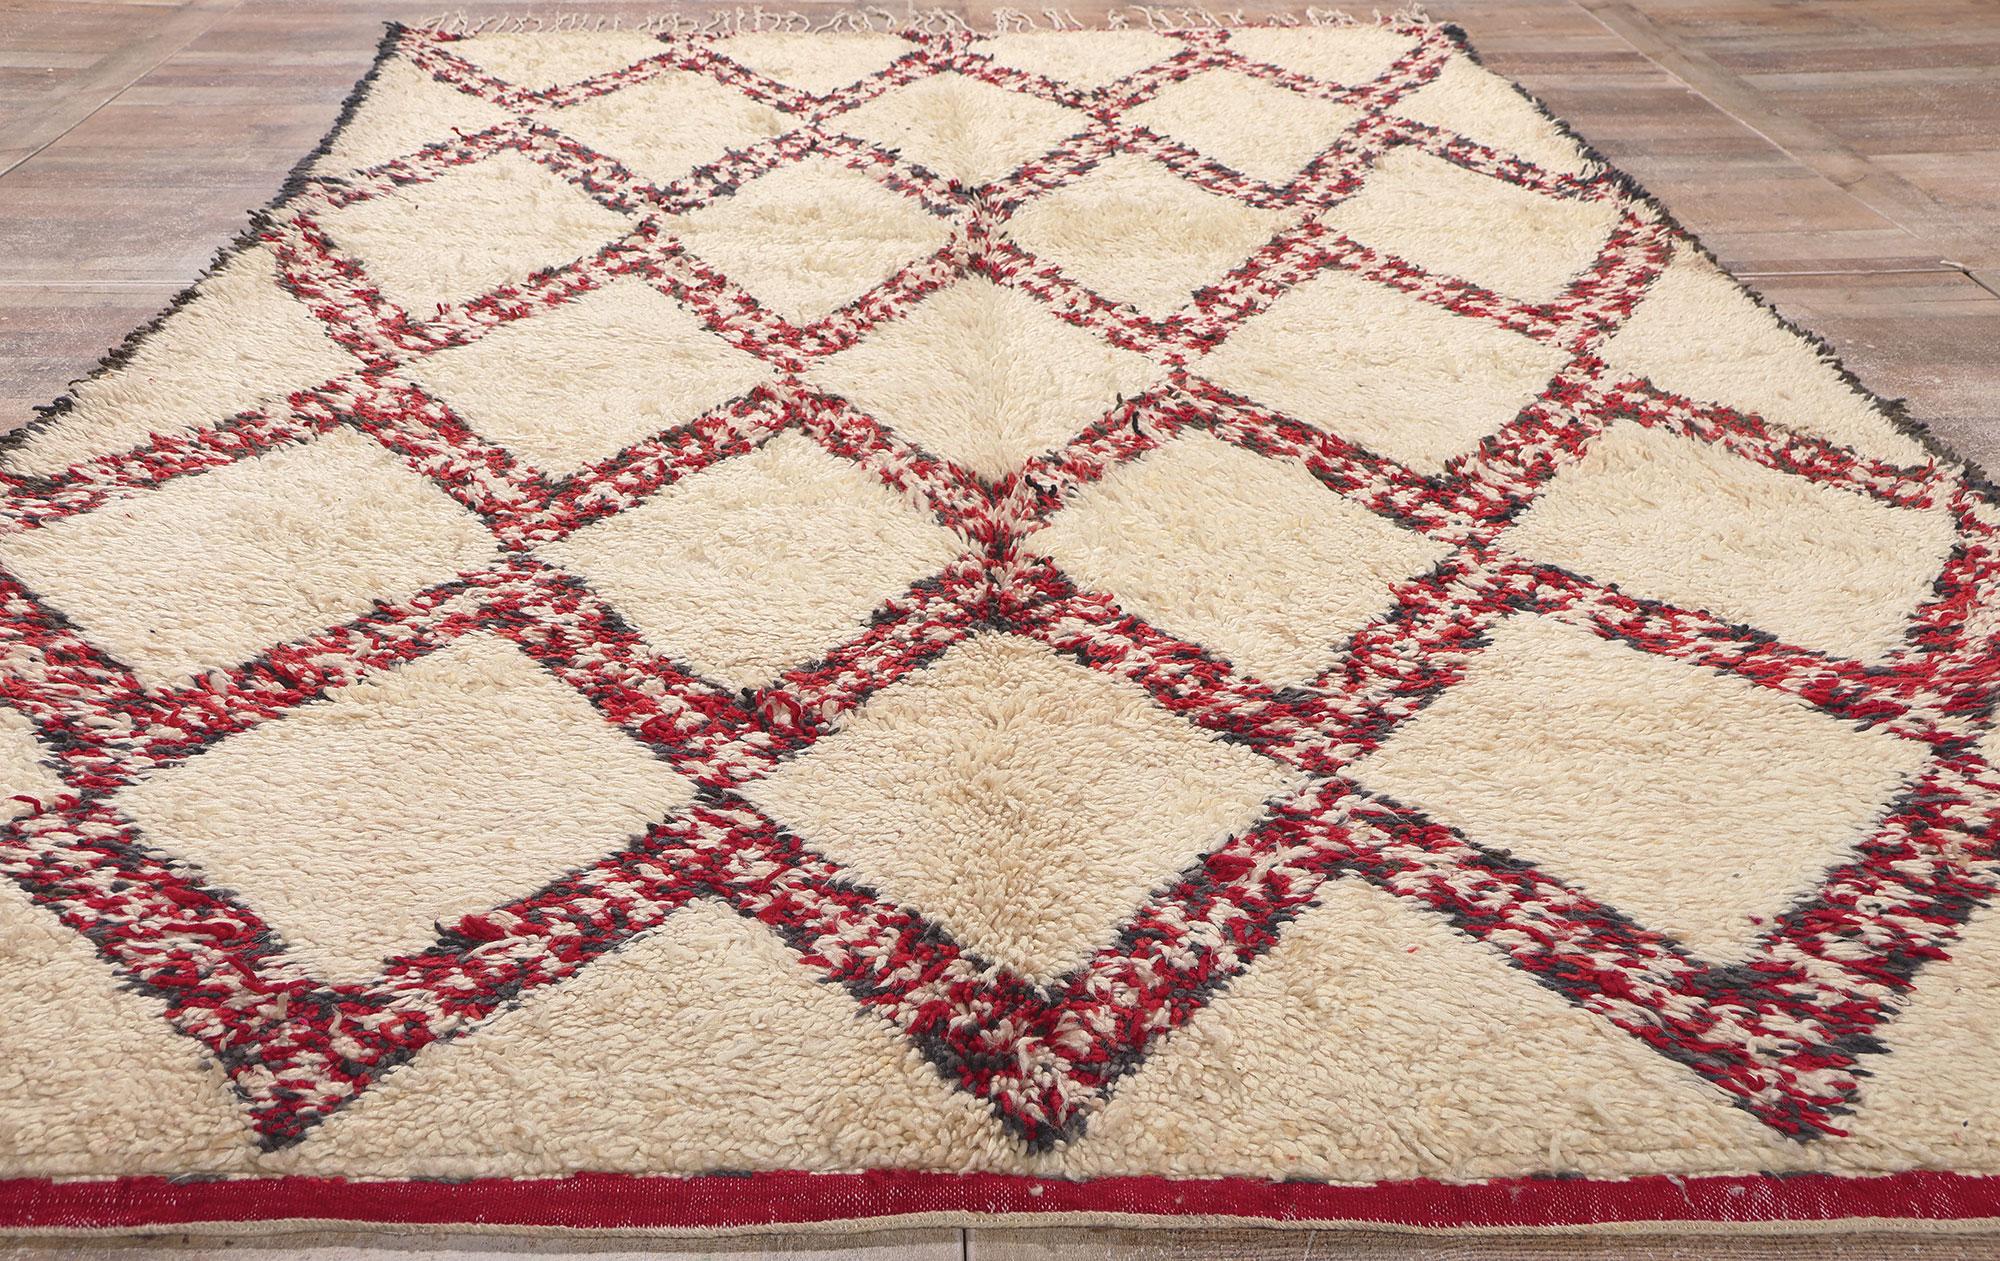 Wool Vintage Moroccan Beni Ourain Rug, Midcentury Modern Meets Cozy Hygge For Sale